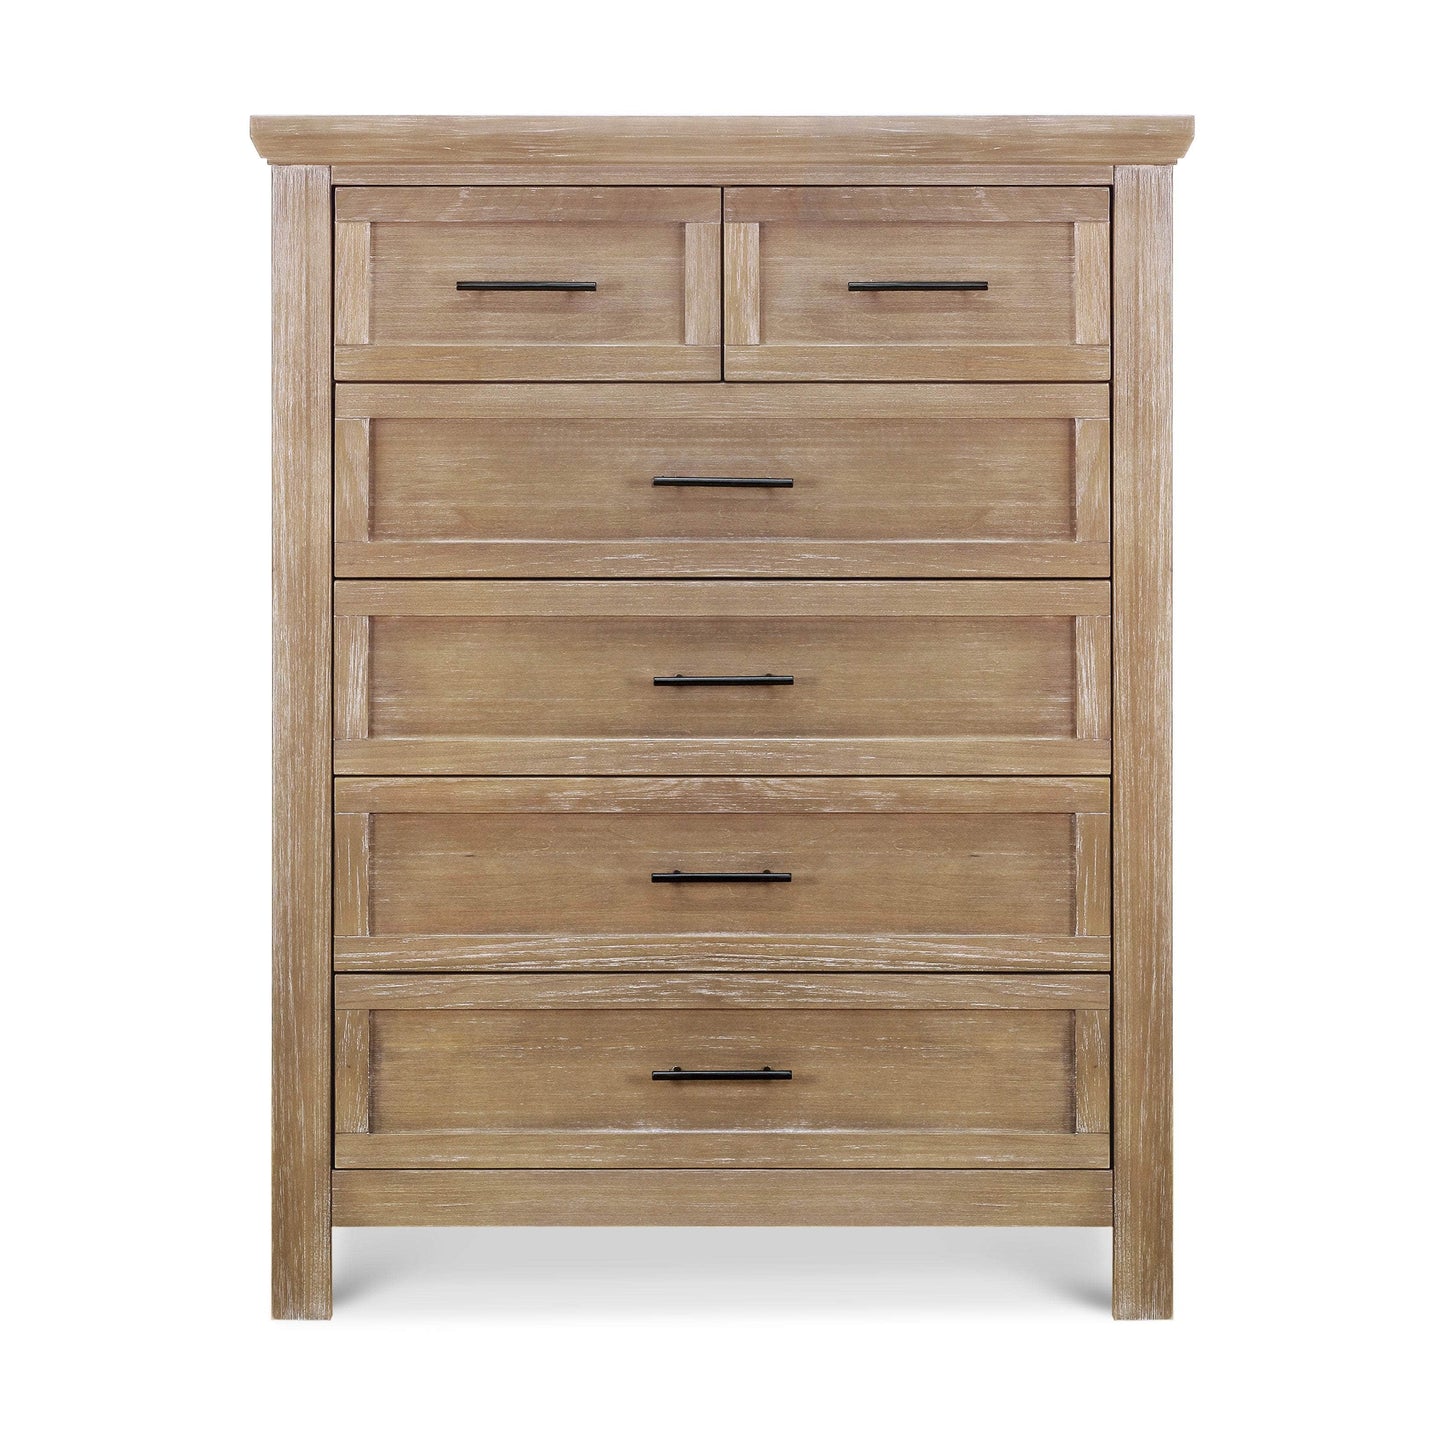 B14525DF,Emory Farmhouse 6-Drawer Chest in Driftwood Finish